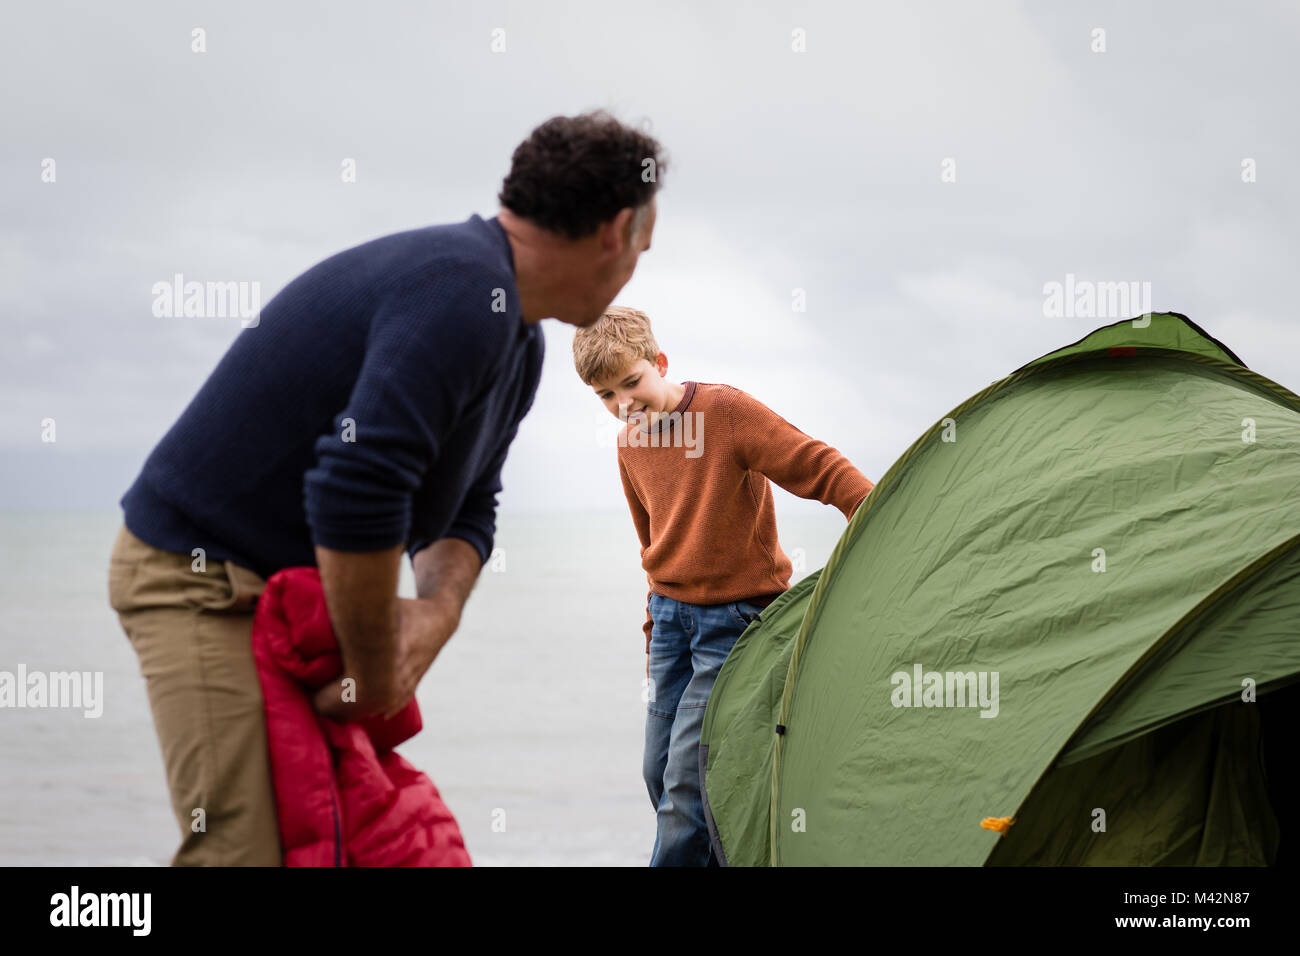 Father and Son putting up a tent together Stock Photo